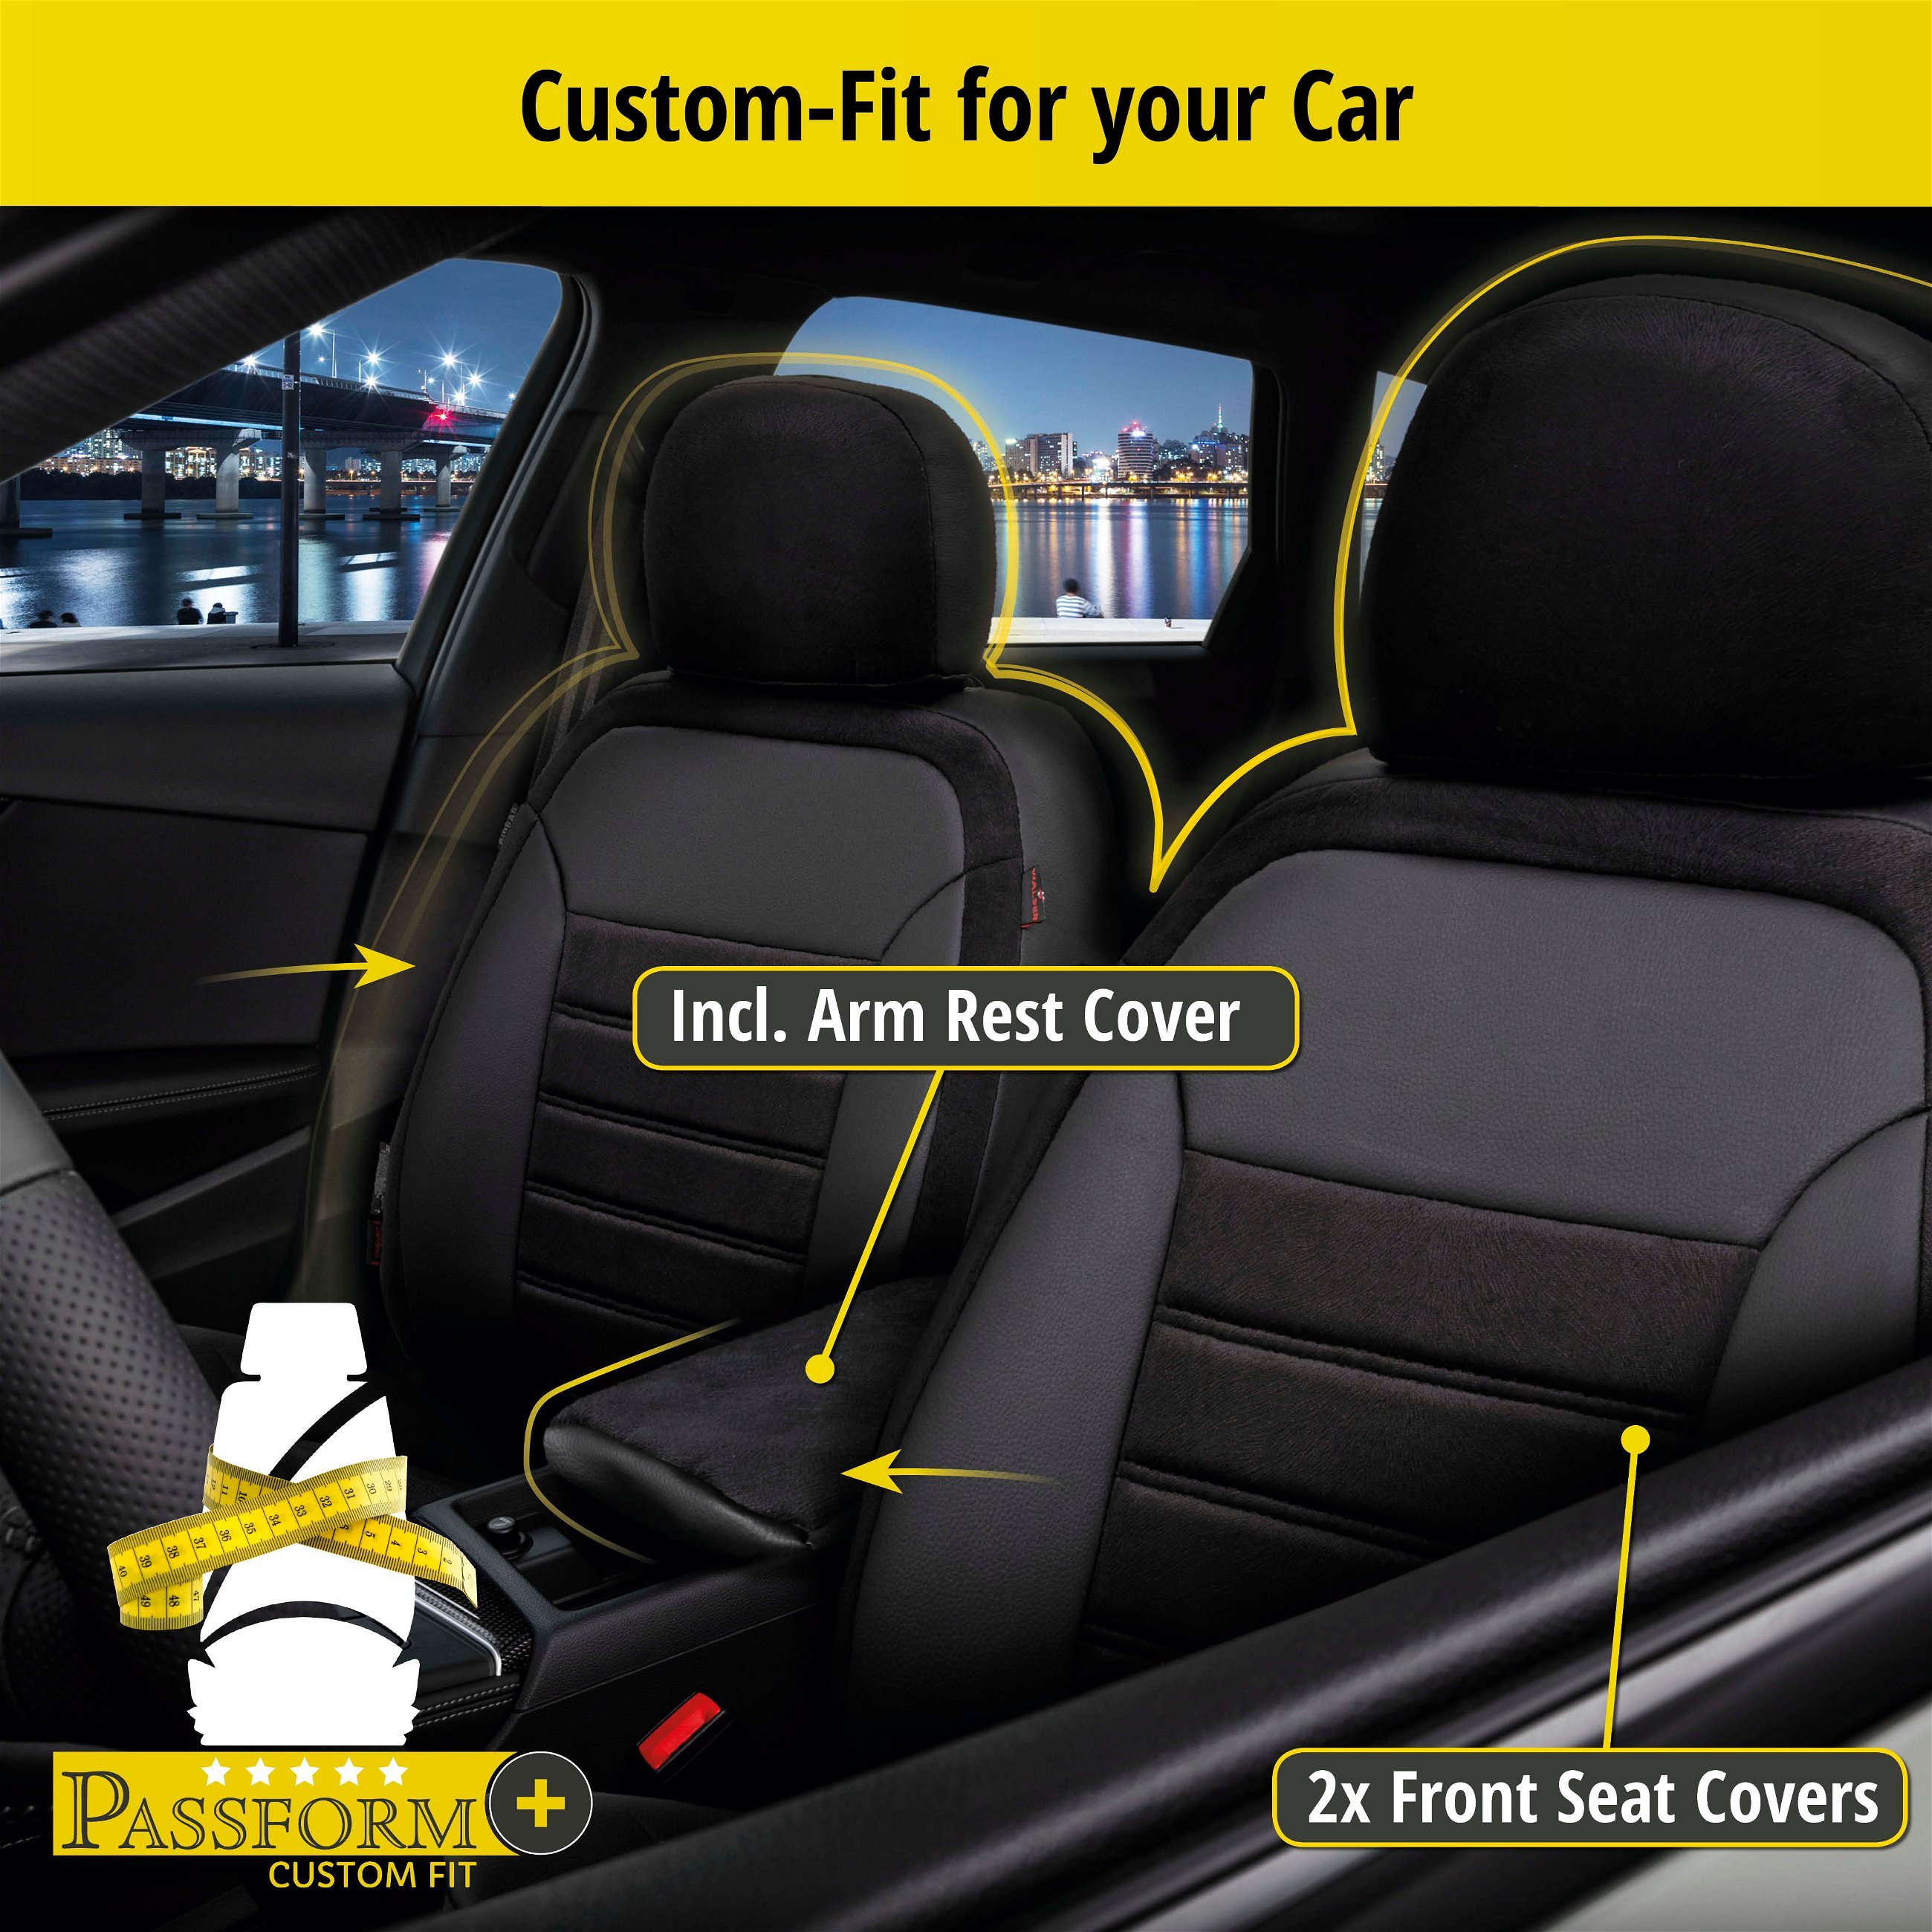 Seat Cover Bari for VW Passat Comfortline 2015-Today, 2 seat covers for sport seats